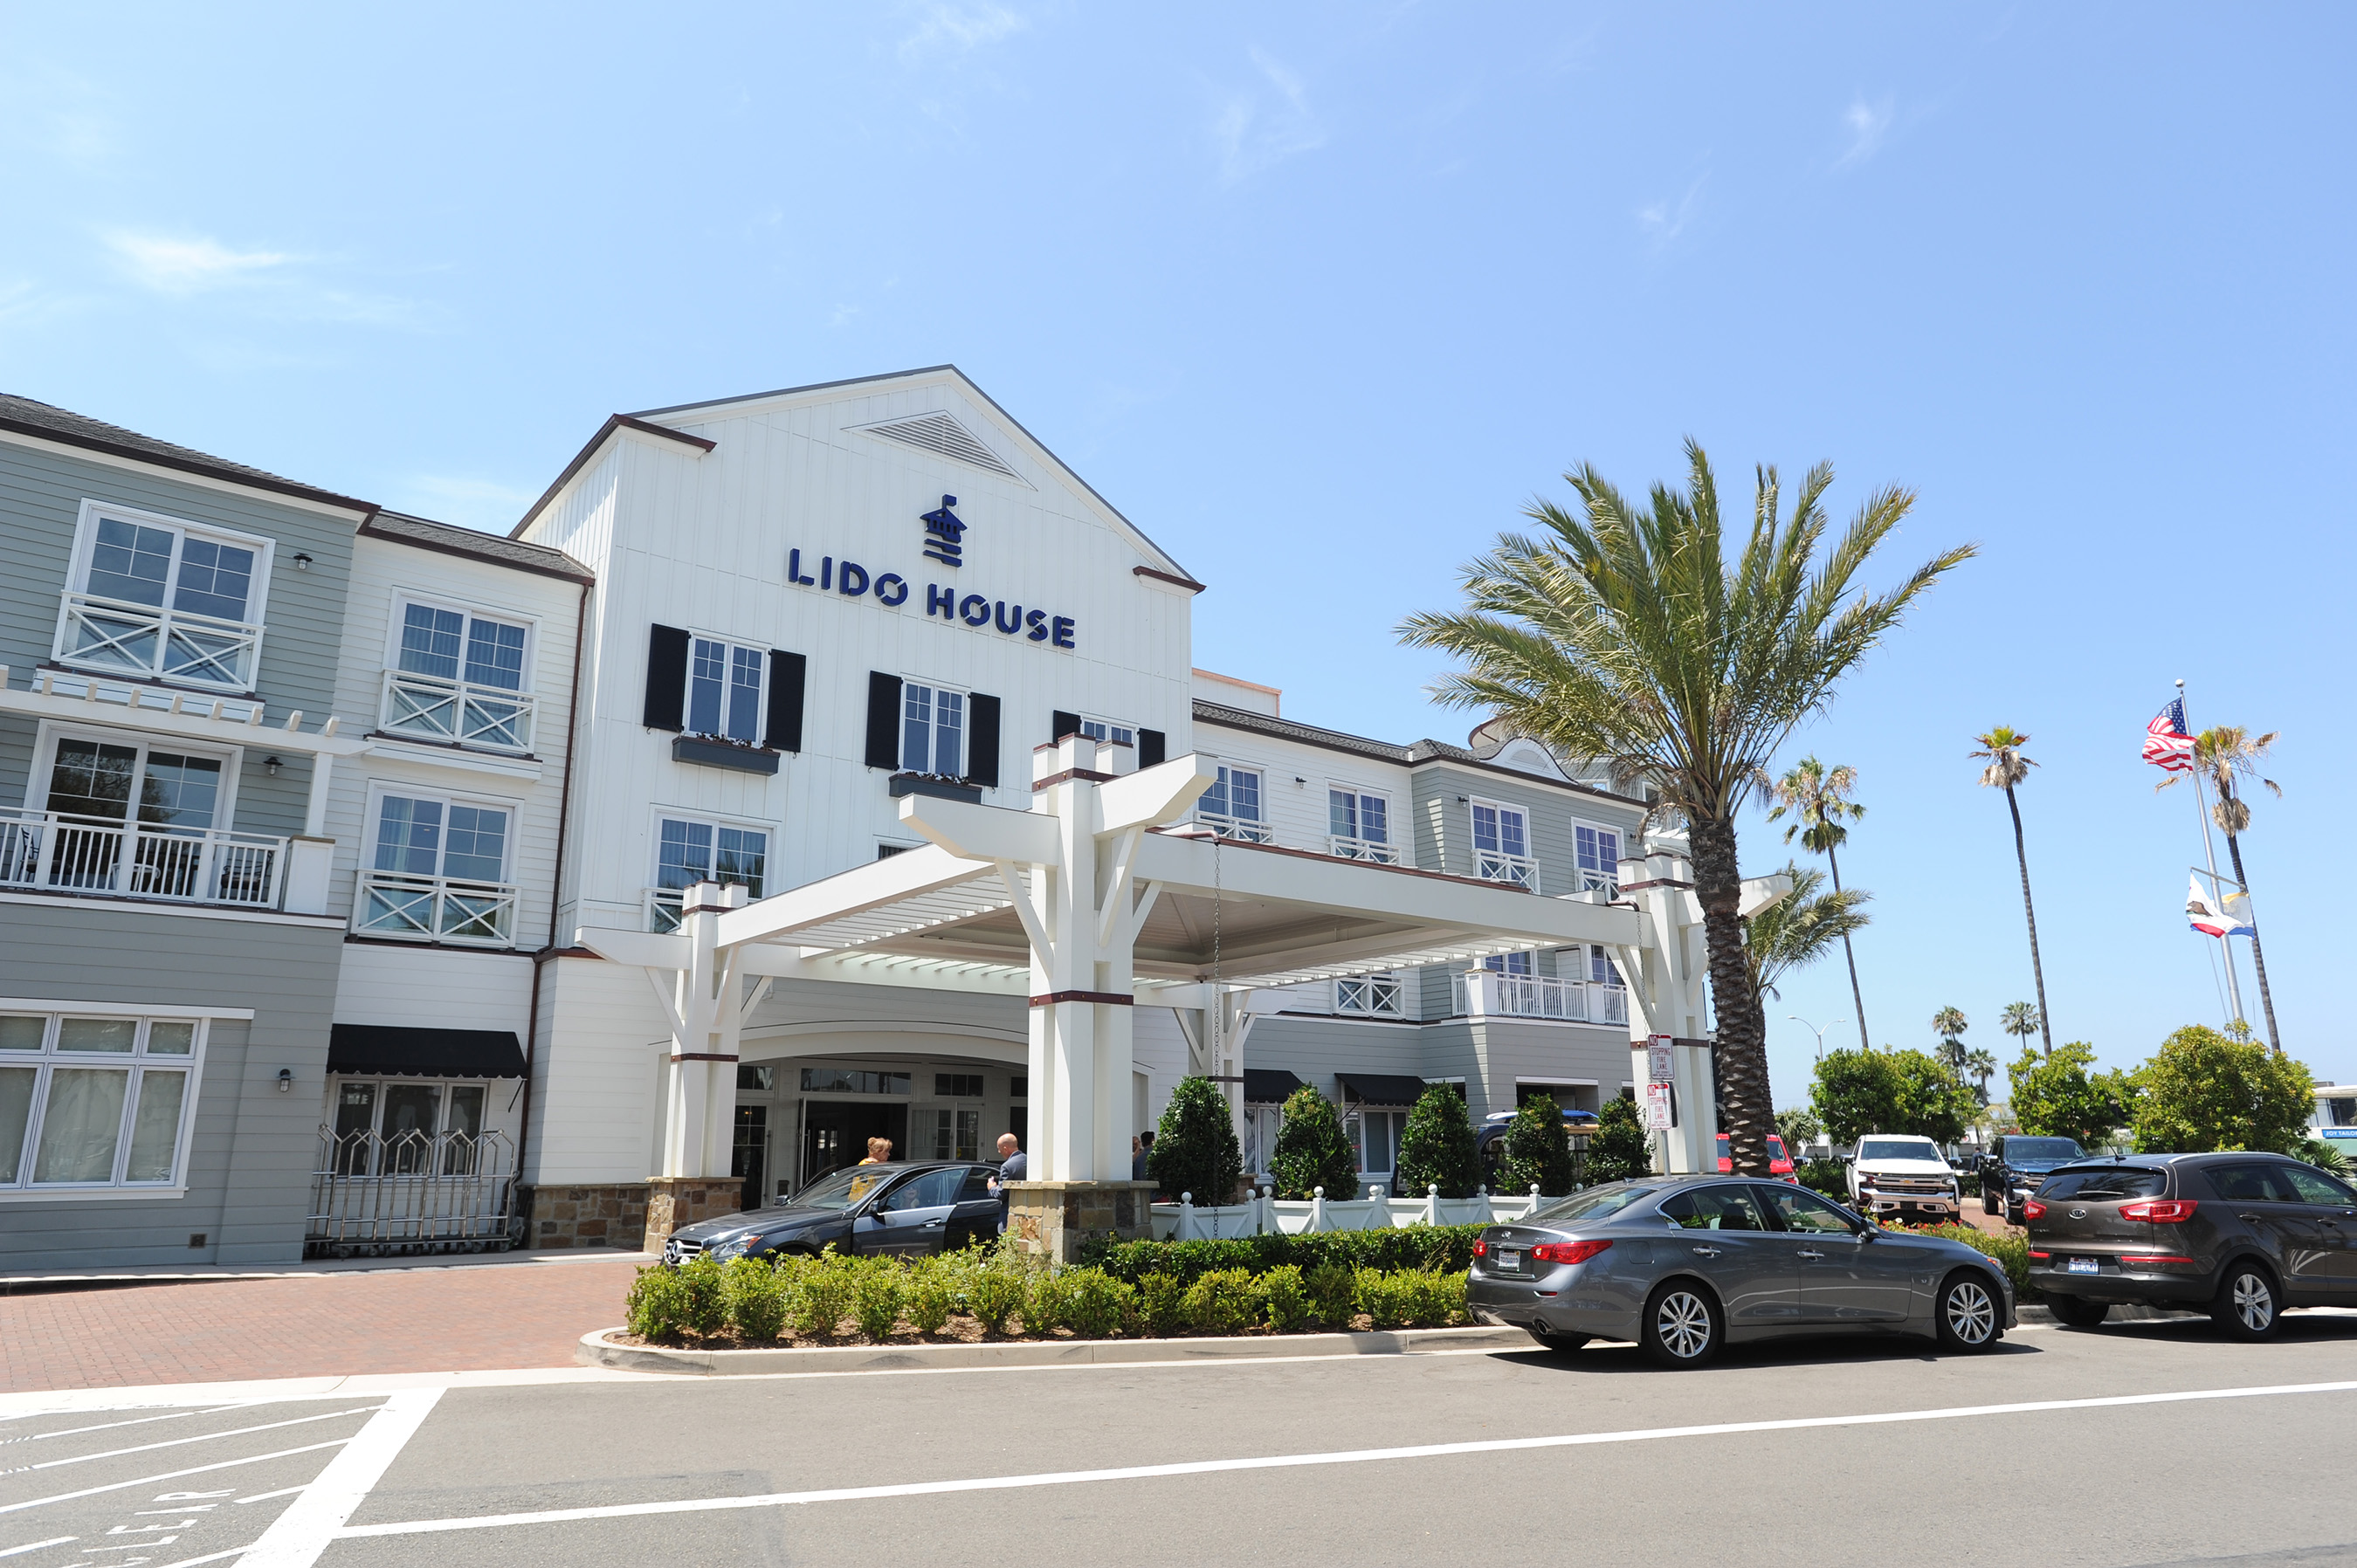 Designed with an effortless sense of style and definitive beach-house vibe, Lido House by Marriott has quickly become one of Newport Beach’s favorite upscale destinations.